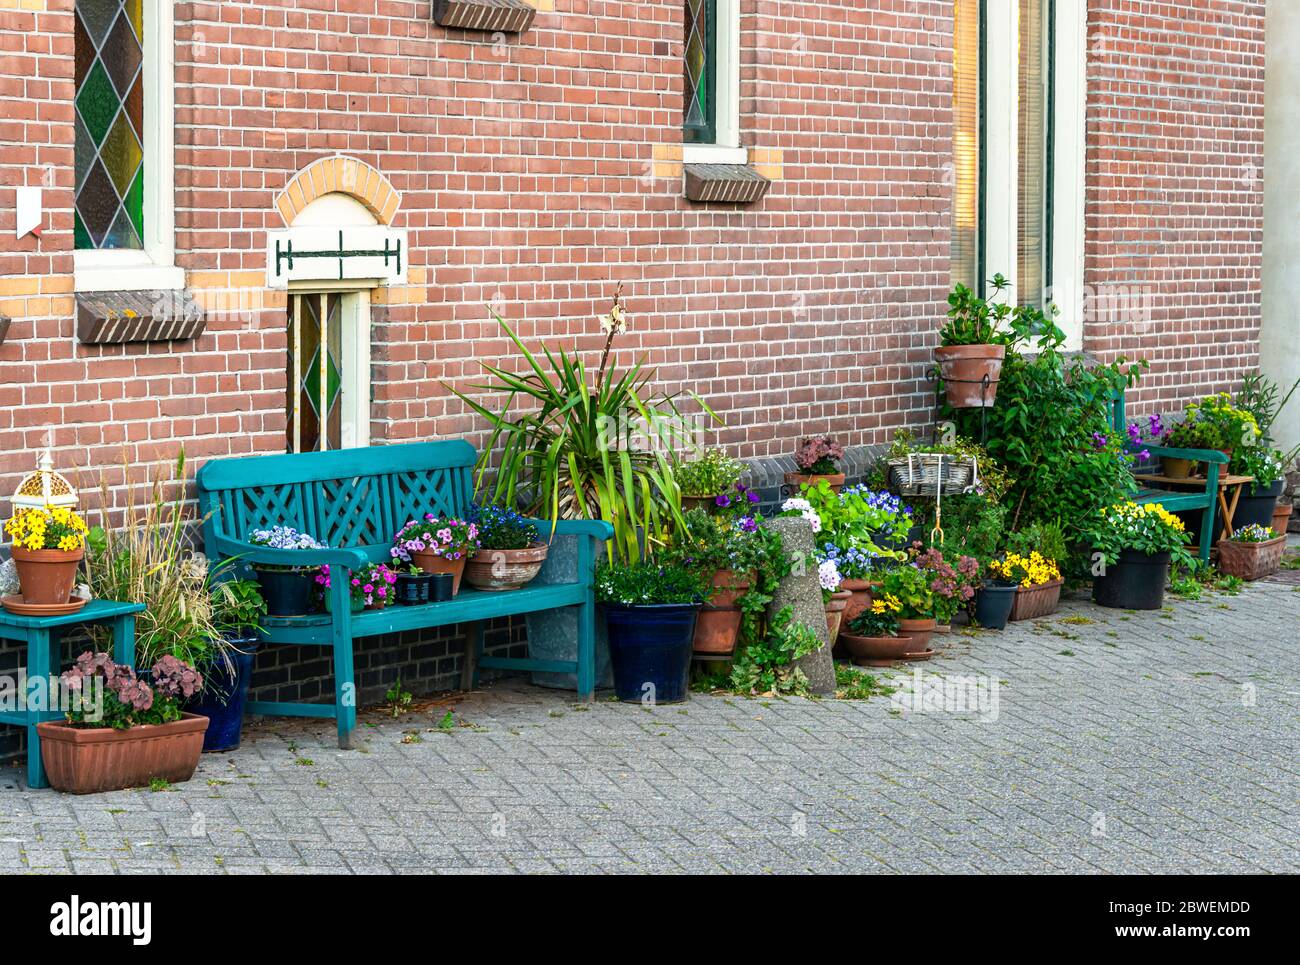 facade of an old Dutch house with various planters and wooden benches on the street with various flower pots filled with flowers placed on it Stock Photo